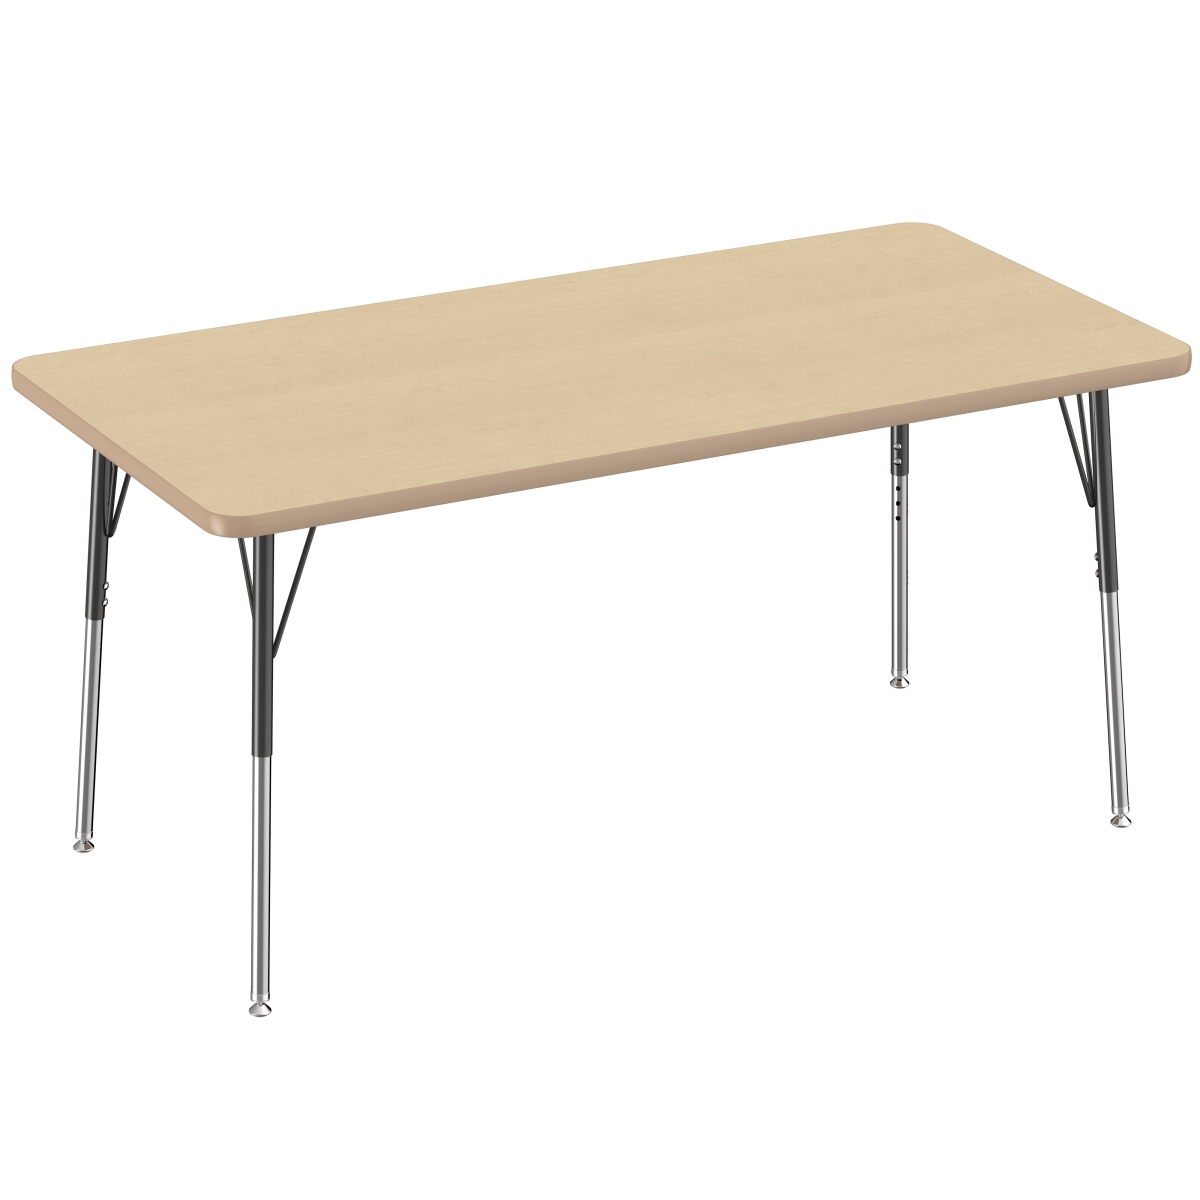 10023-mpmp 30 X 60 In. Rectangle T-mold Adjustable Activity Table With Standard Swivel - Maple